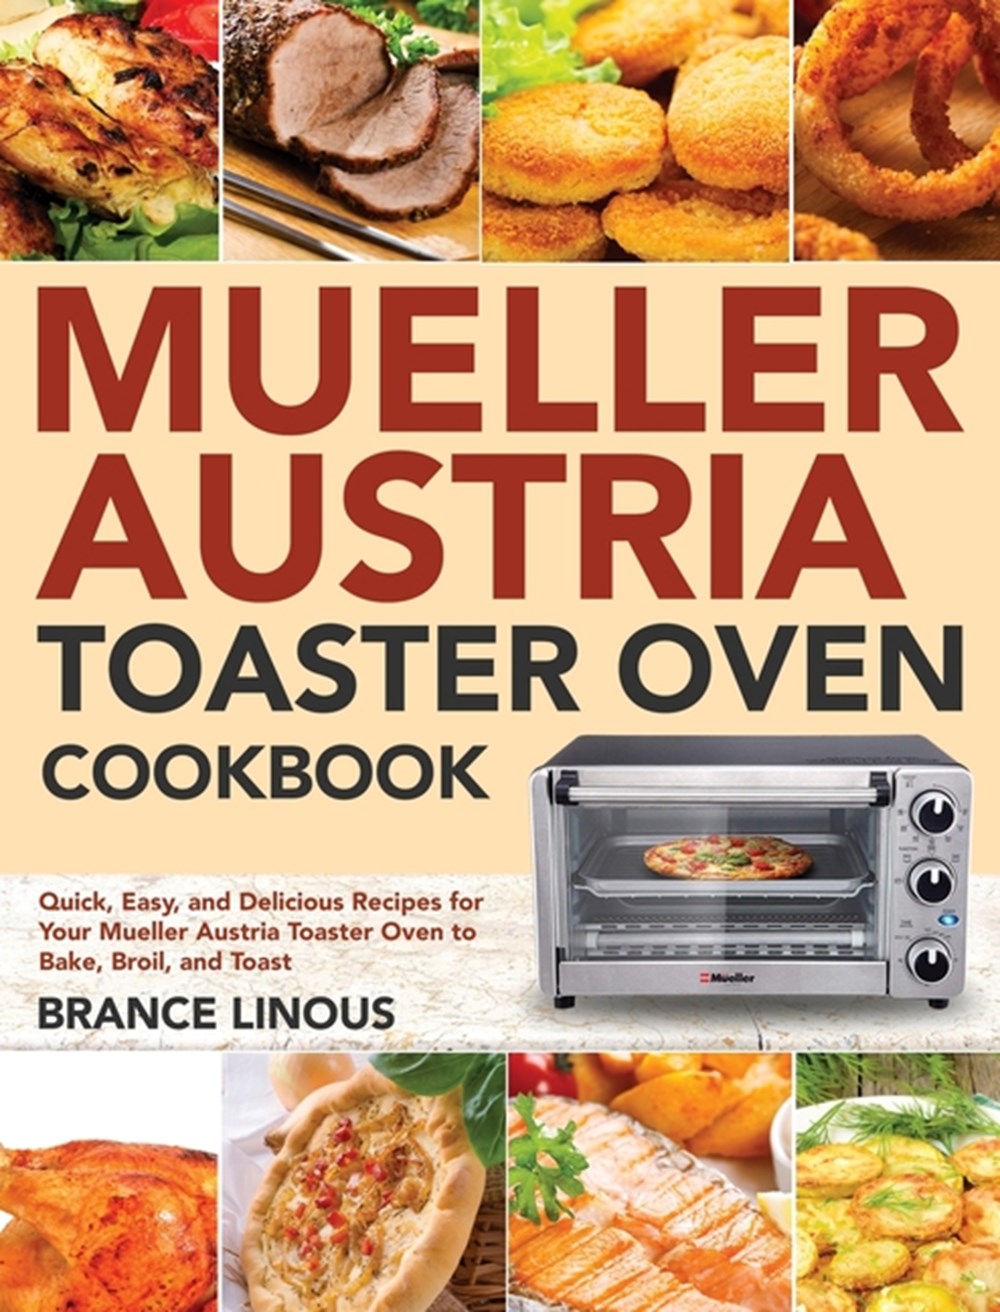 Buy Mueller Austria Toaster Oven Cookbook: Quick, Easy, and Delicious  Recipes for Your Mueller Austria Toaster Oven to Bake, Broil, and Toast by  Brance Linous (9781953702302) from Porchlight Book Company - Porchlight